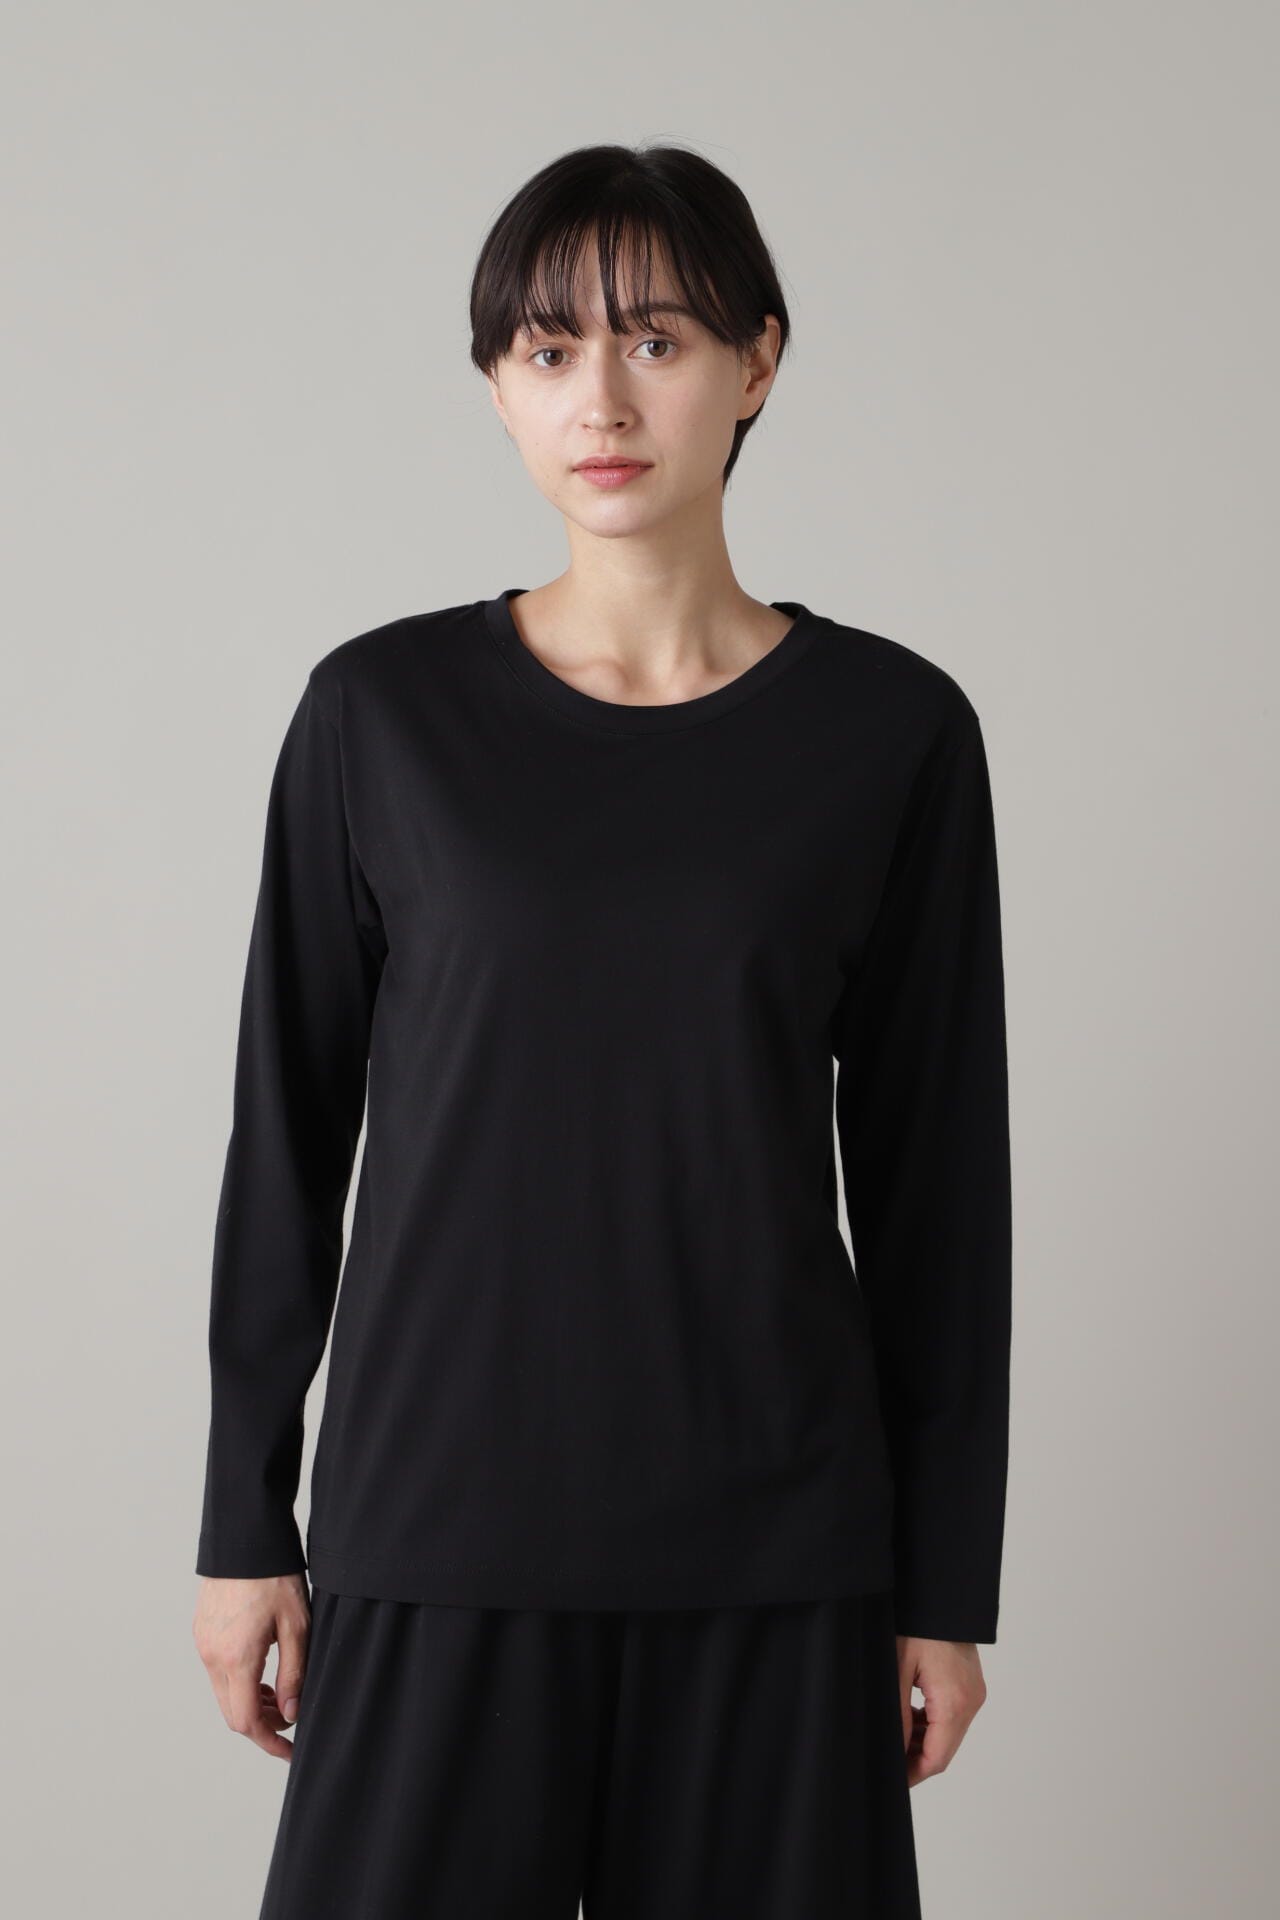 COMPACT COTTON JERSEY | MARGARET HOWELL | MARGARET HOWELL